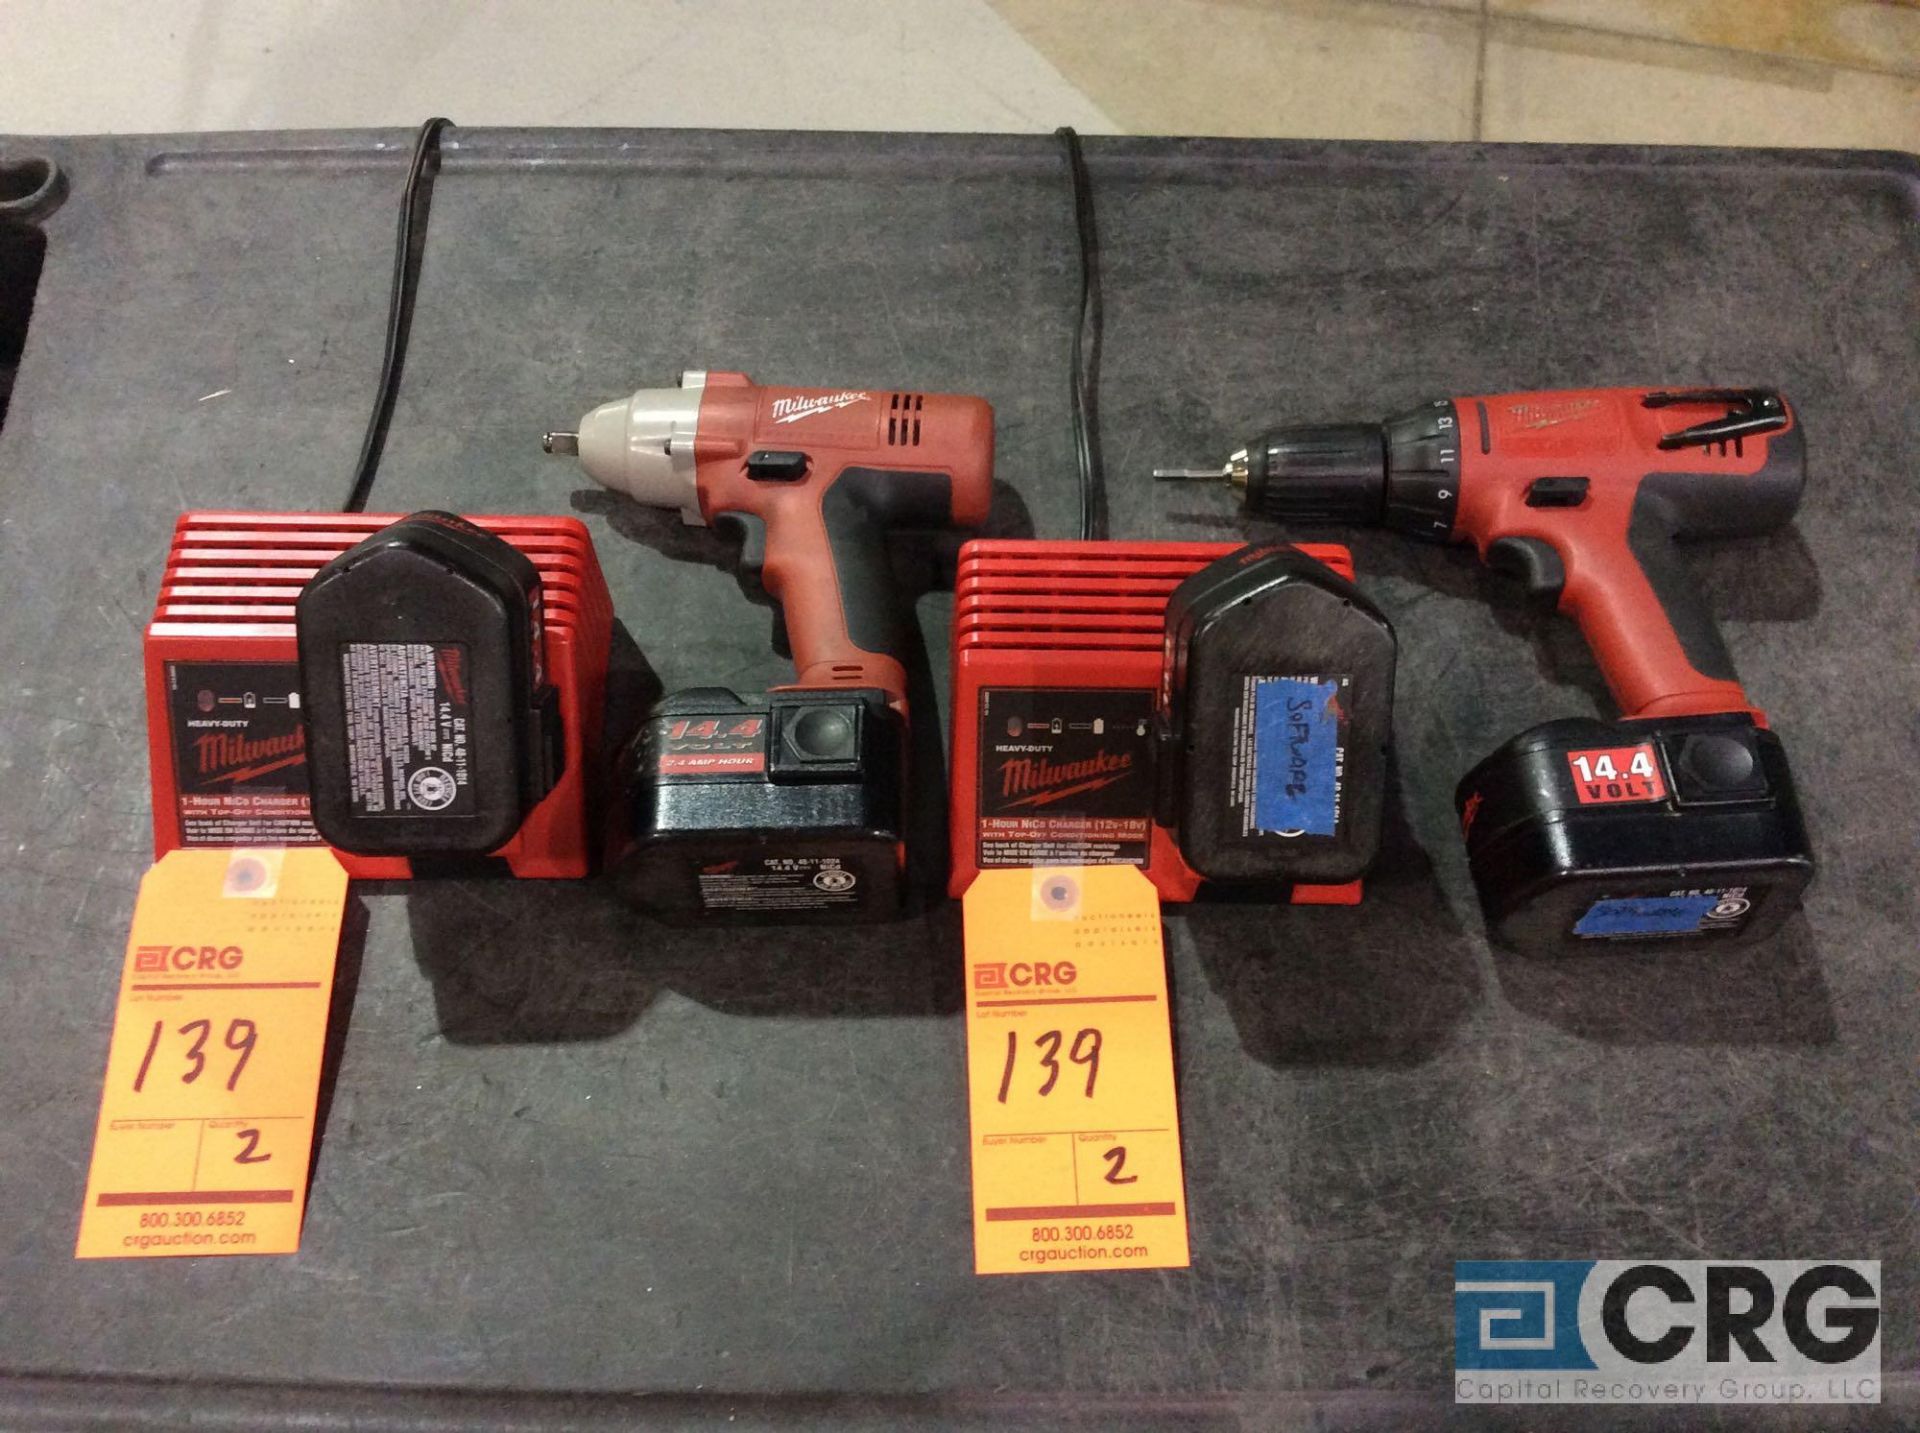 Lot of (2) Milwaukee cordless tools including 0612-20, 14.4 1/2 inch cordless drill and 9082-20,